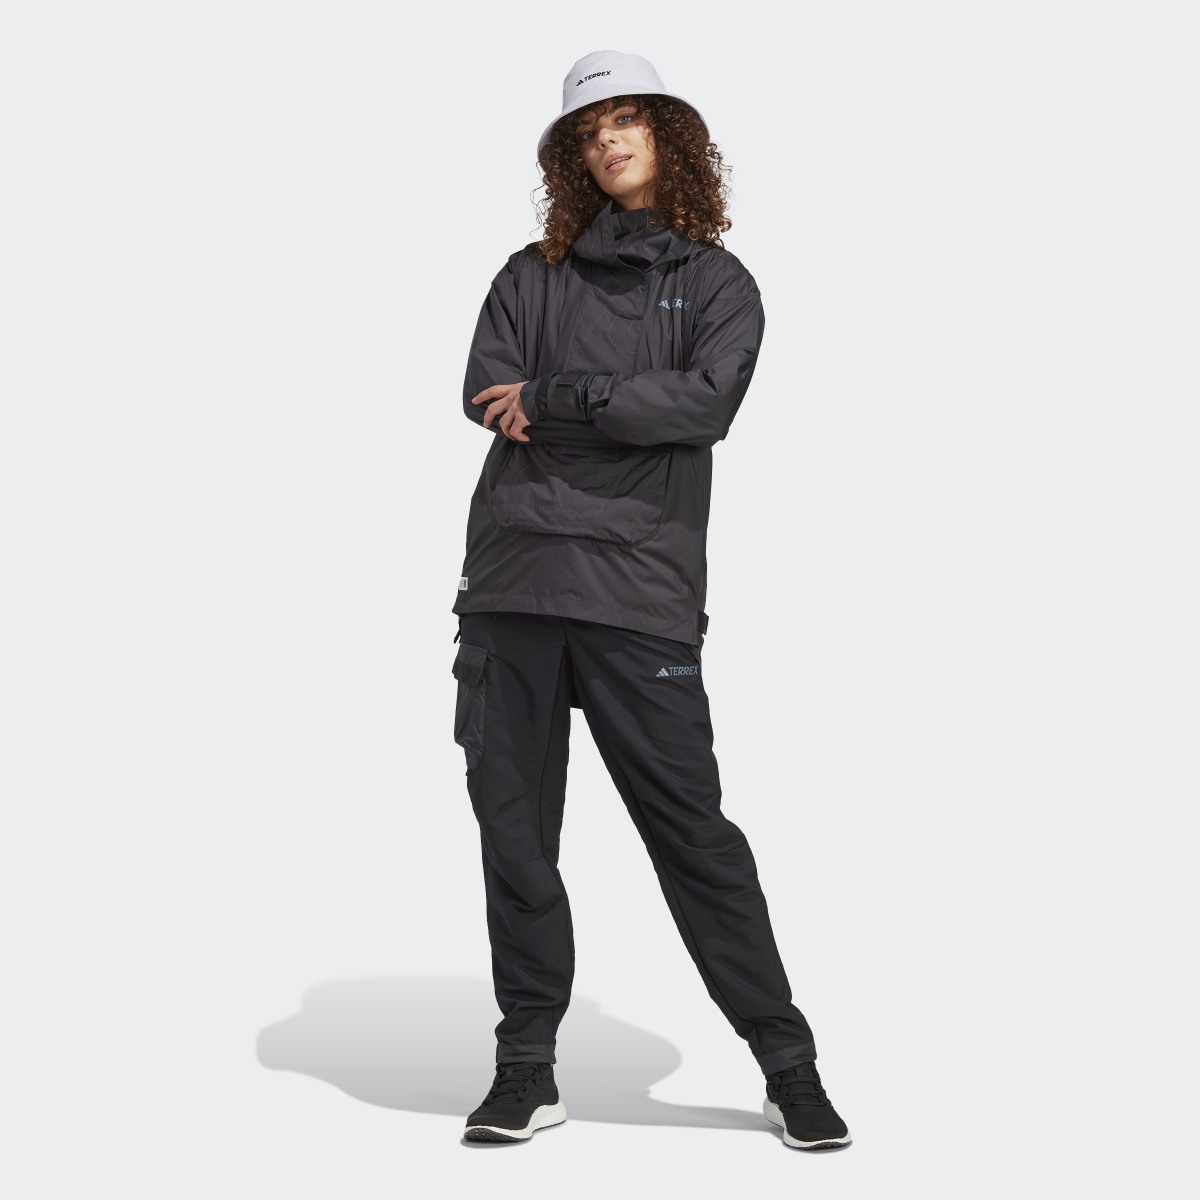 Adidas TERREX Made to Be Remade Wind Anorak. 11